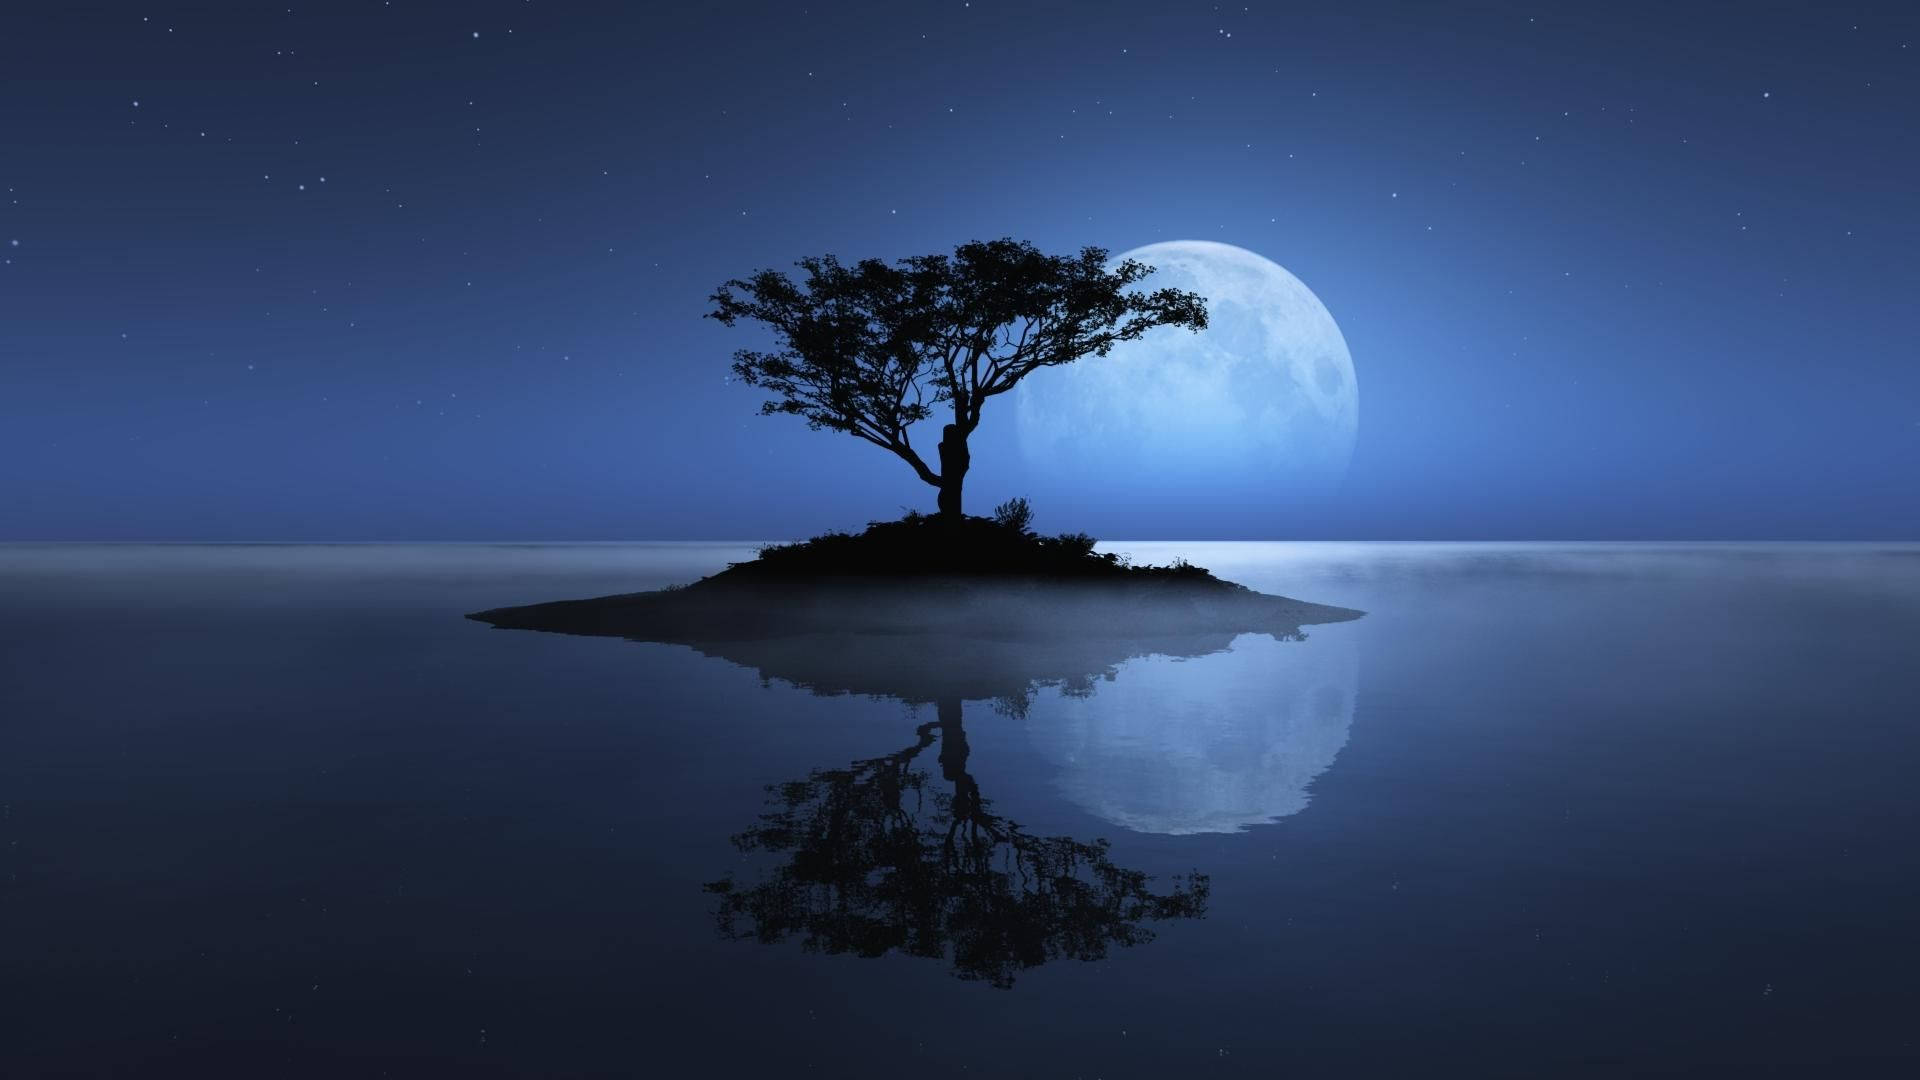 Download Natural Tree On Island During Full Moon Wallpaper